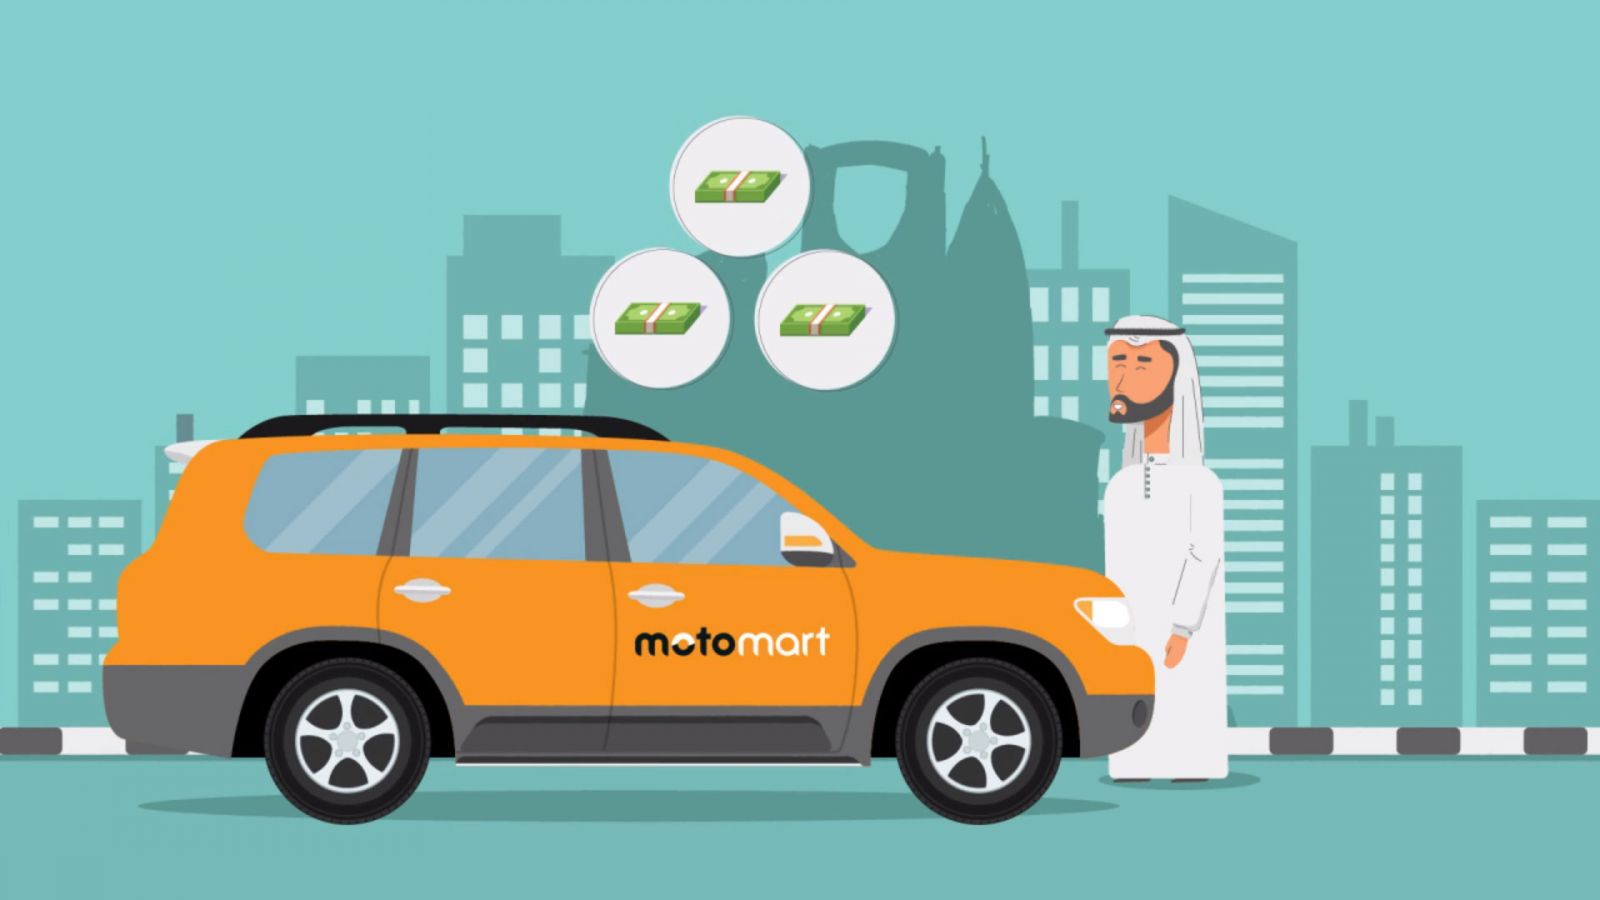 Motomart-Buy & Sell Used Car  - Video Animation